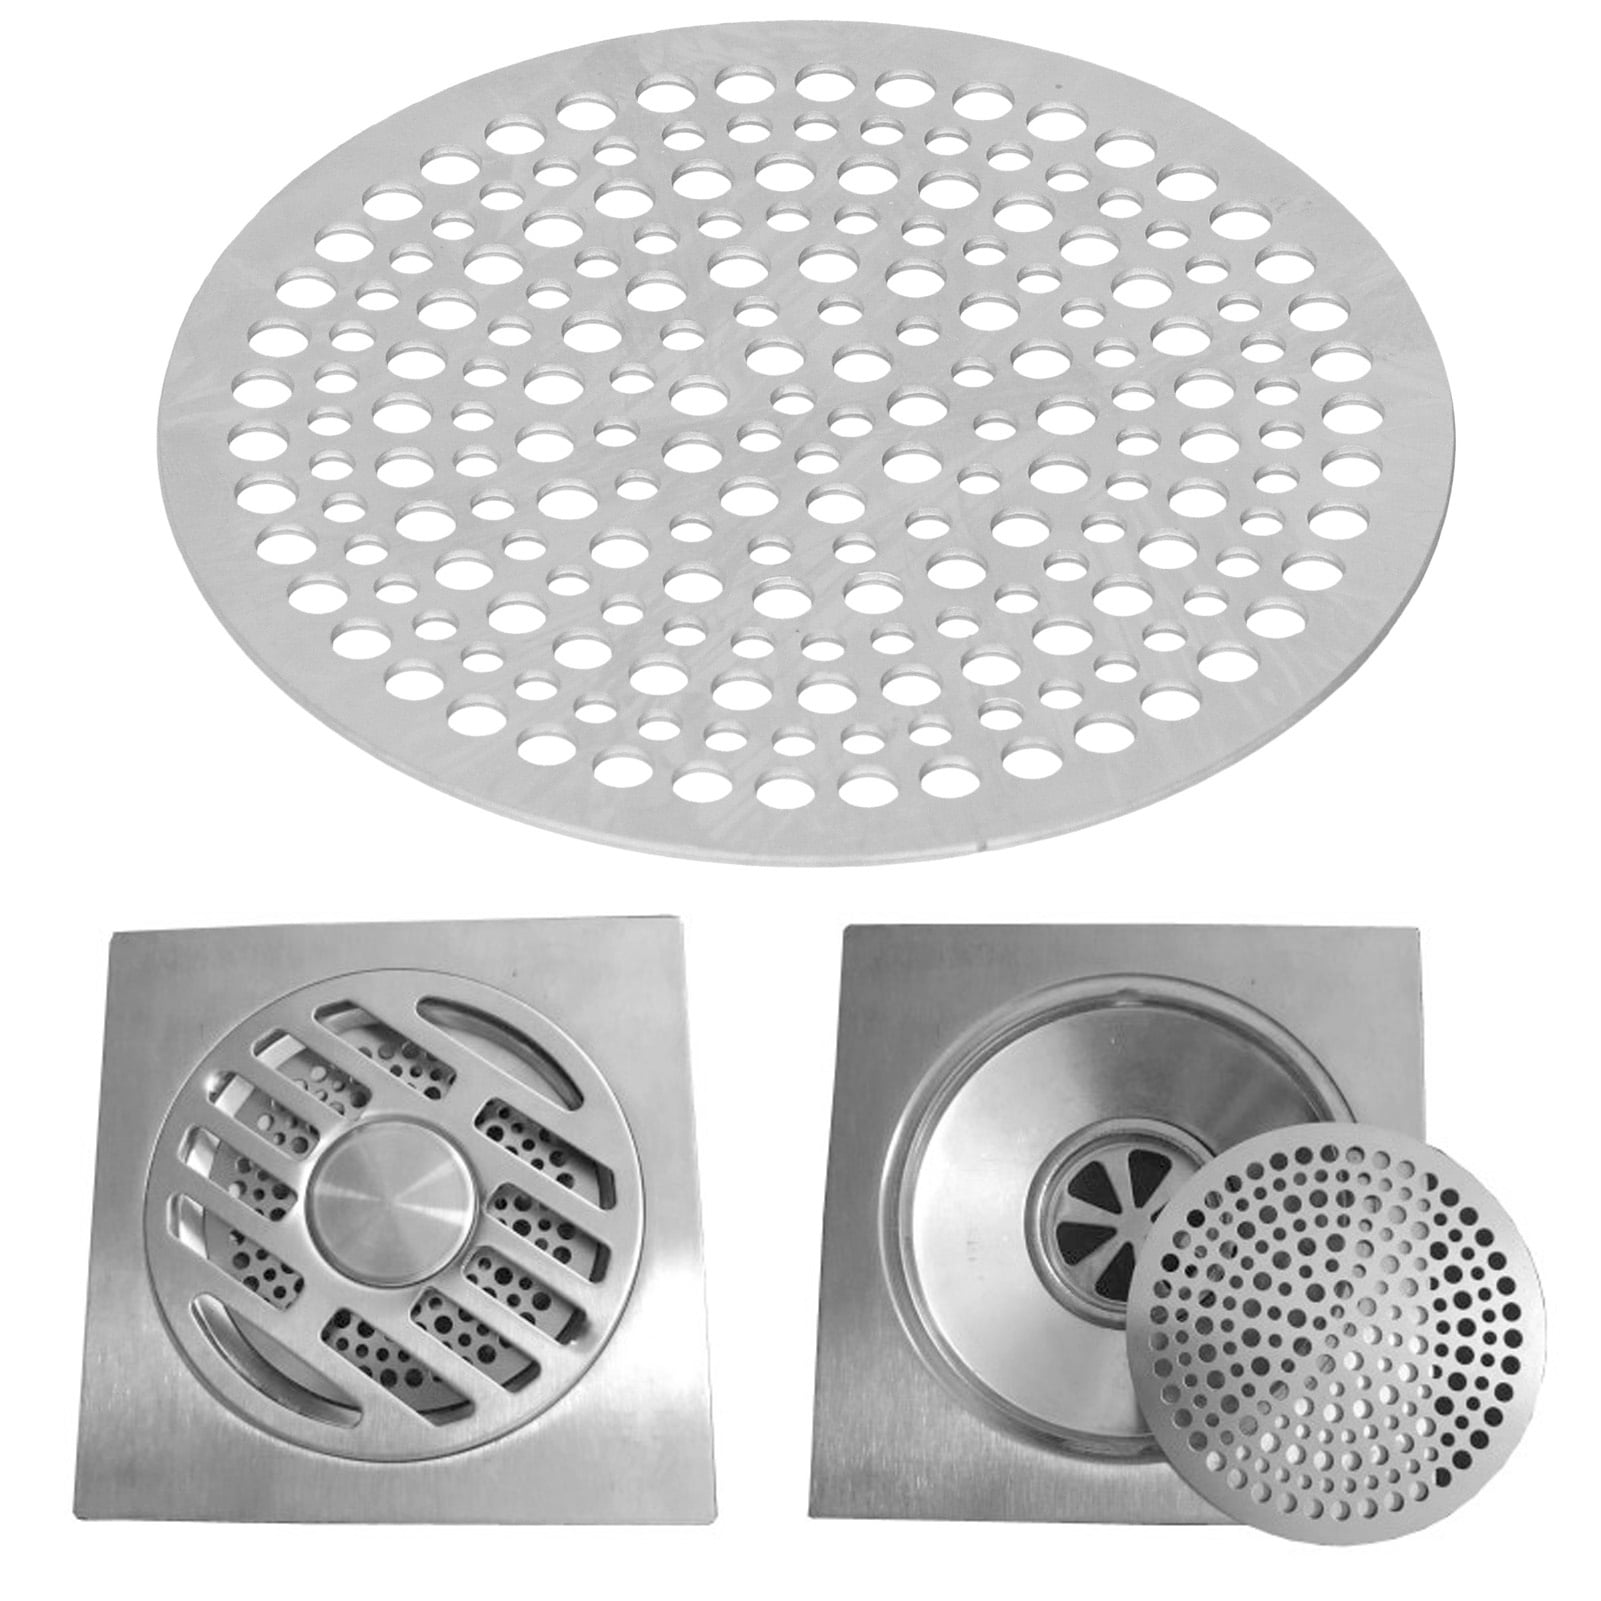 2pcs Grips Bathtub Sink Stall Drain Plug Protector Cover Stoppers 